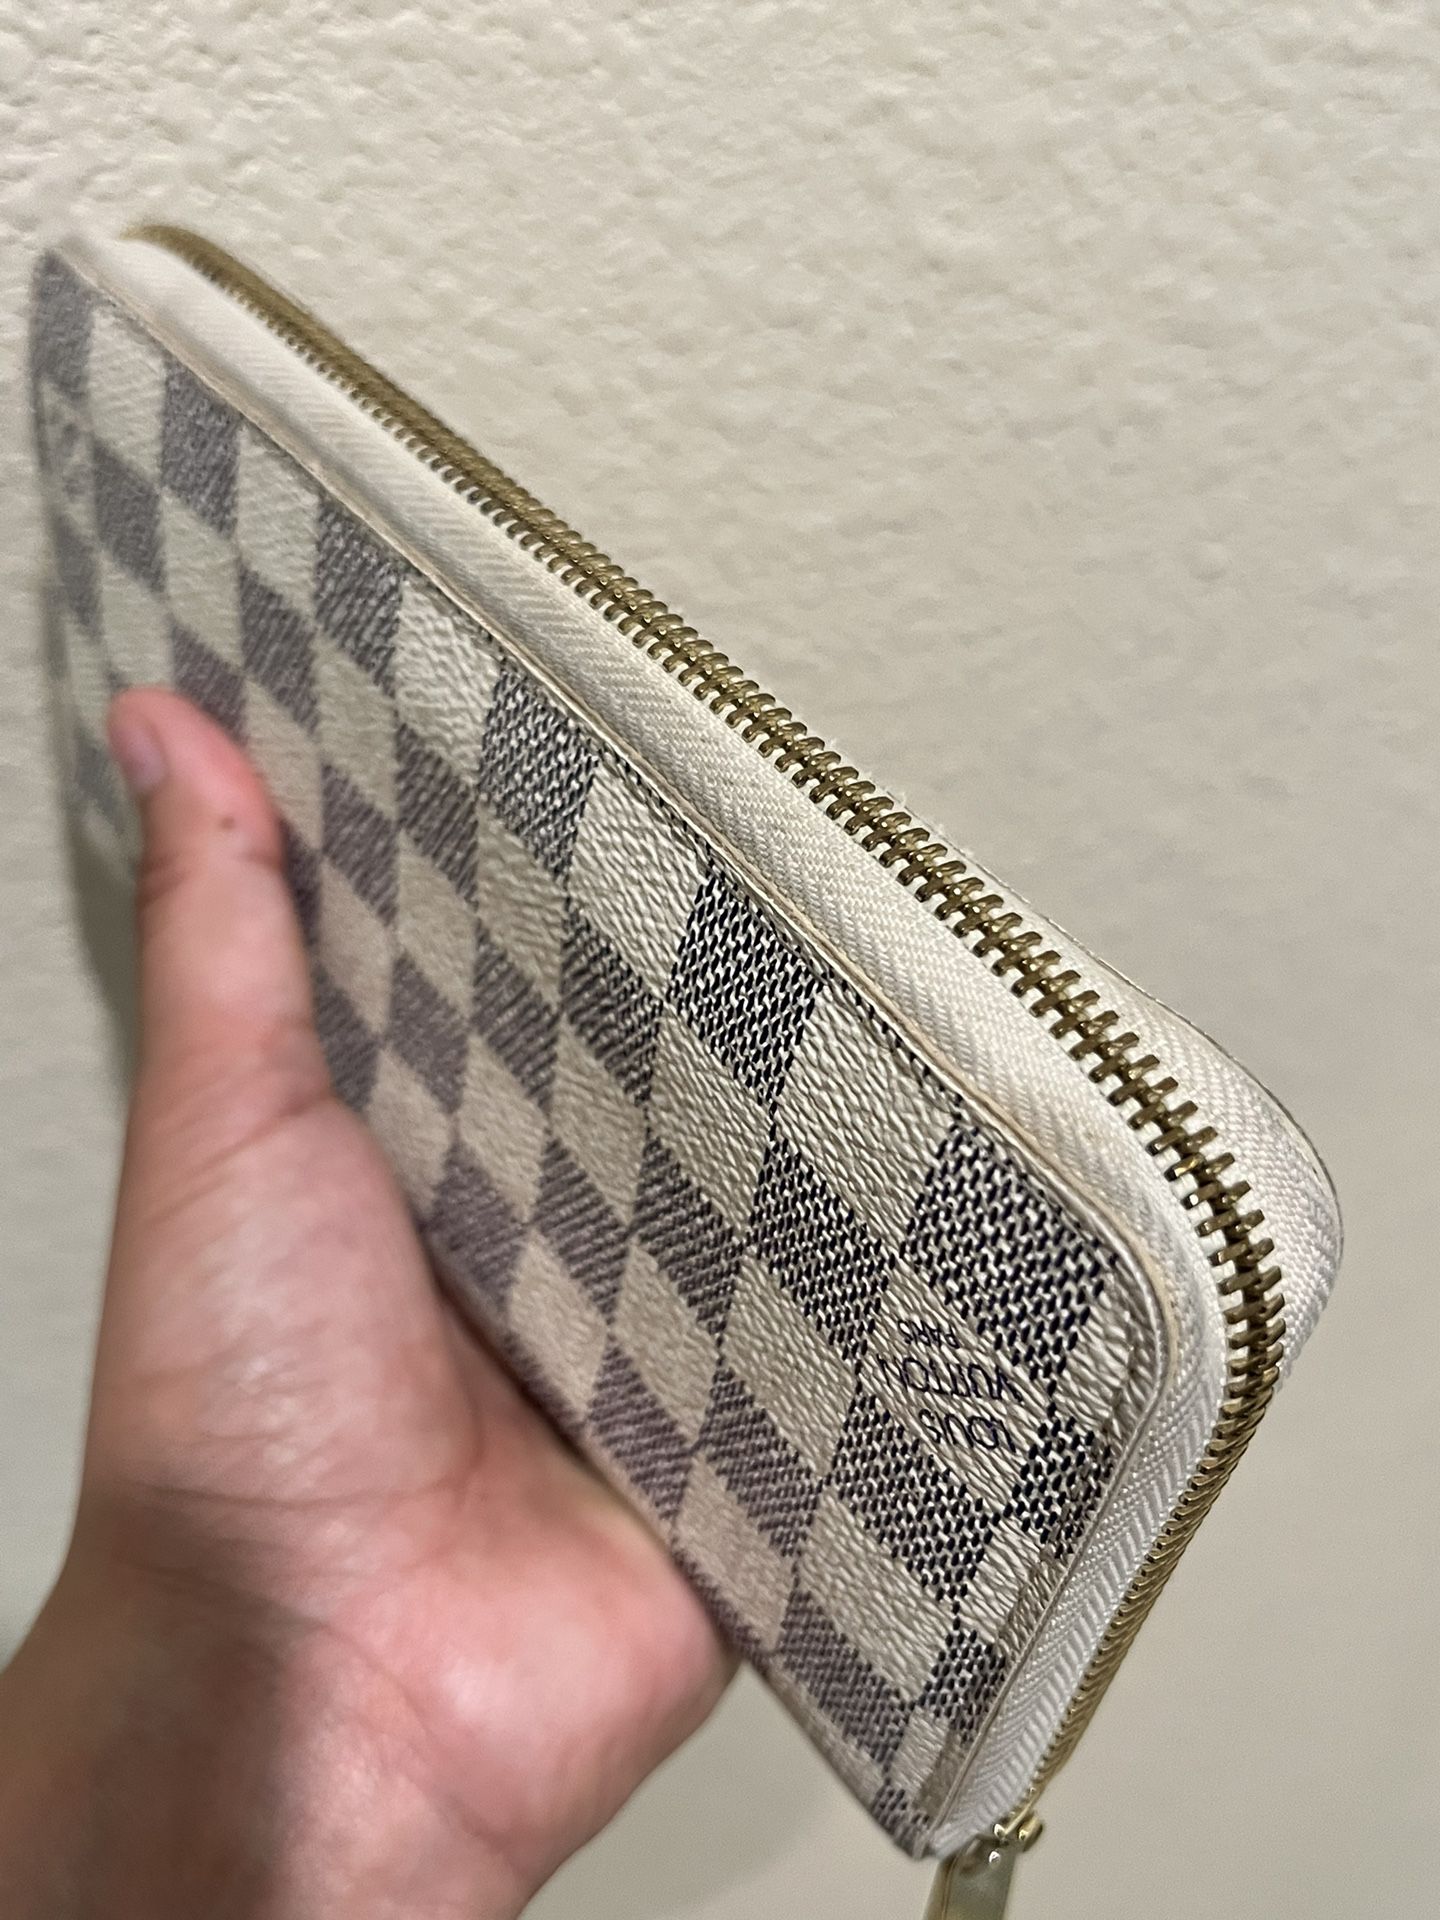 Louis Vuitton Damier Azur Wallet Authentic W Tags And Certificate  Authenticity Excellent Condition for Sale in Gardena, CA - OfferUp